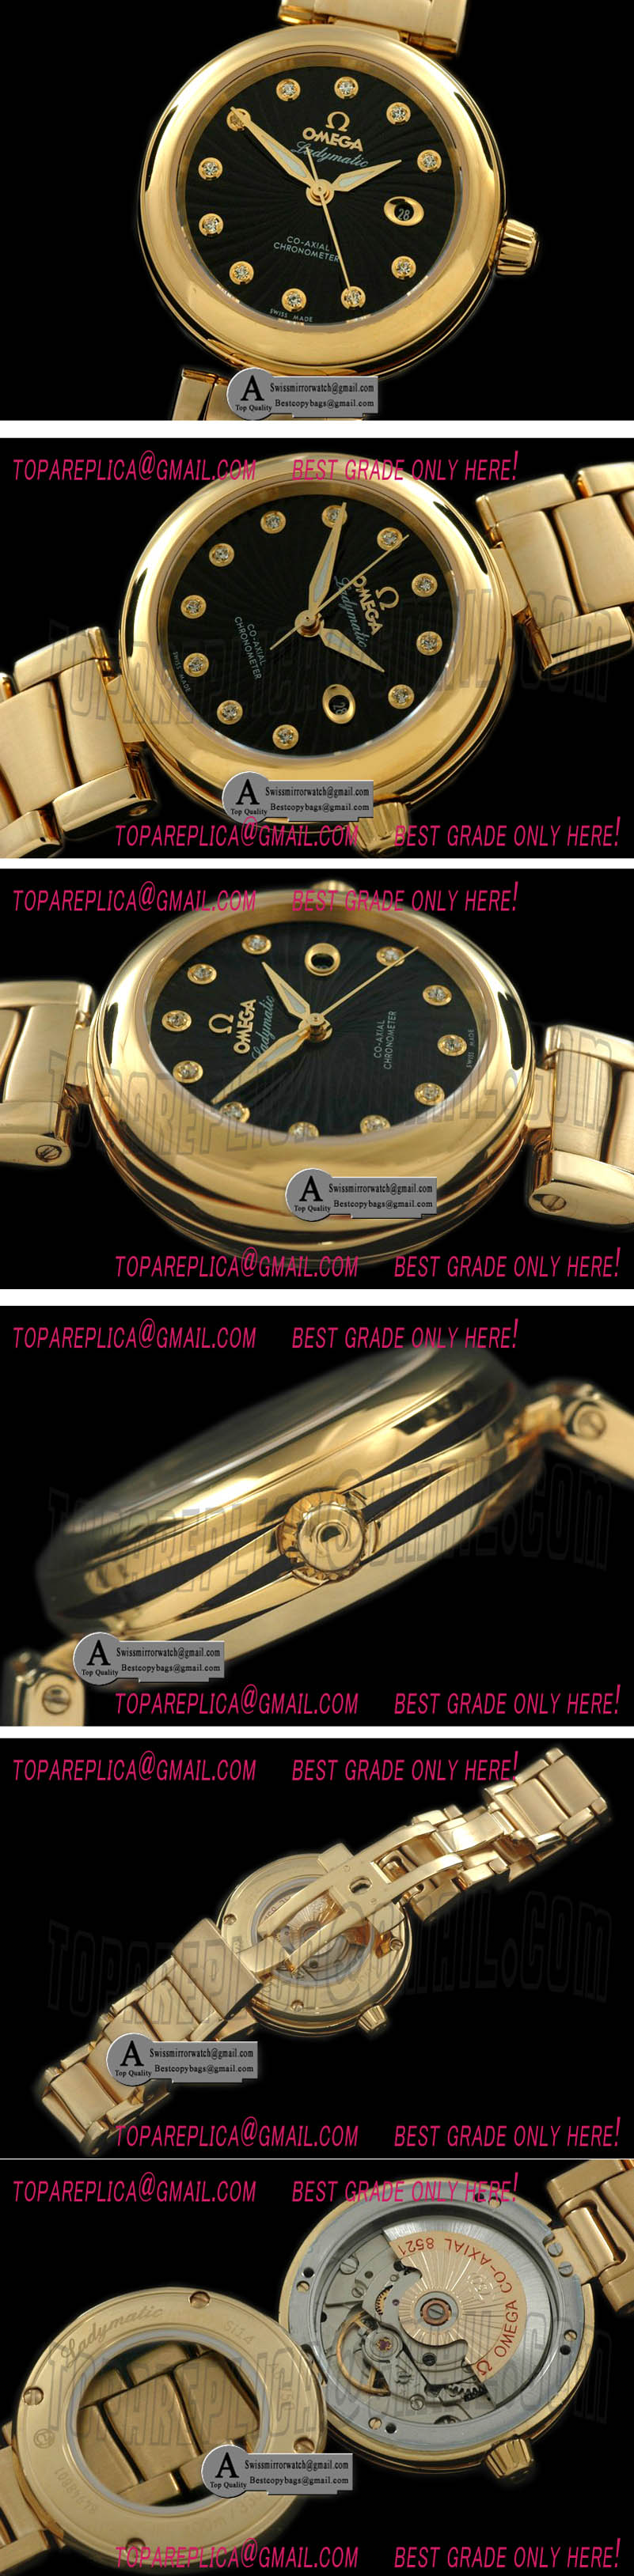 Omega 425.60.34.20.51.002 Deville Ladymatic Mid Yellow Gold/Yellow Gold Black A-2836 Replica Watches